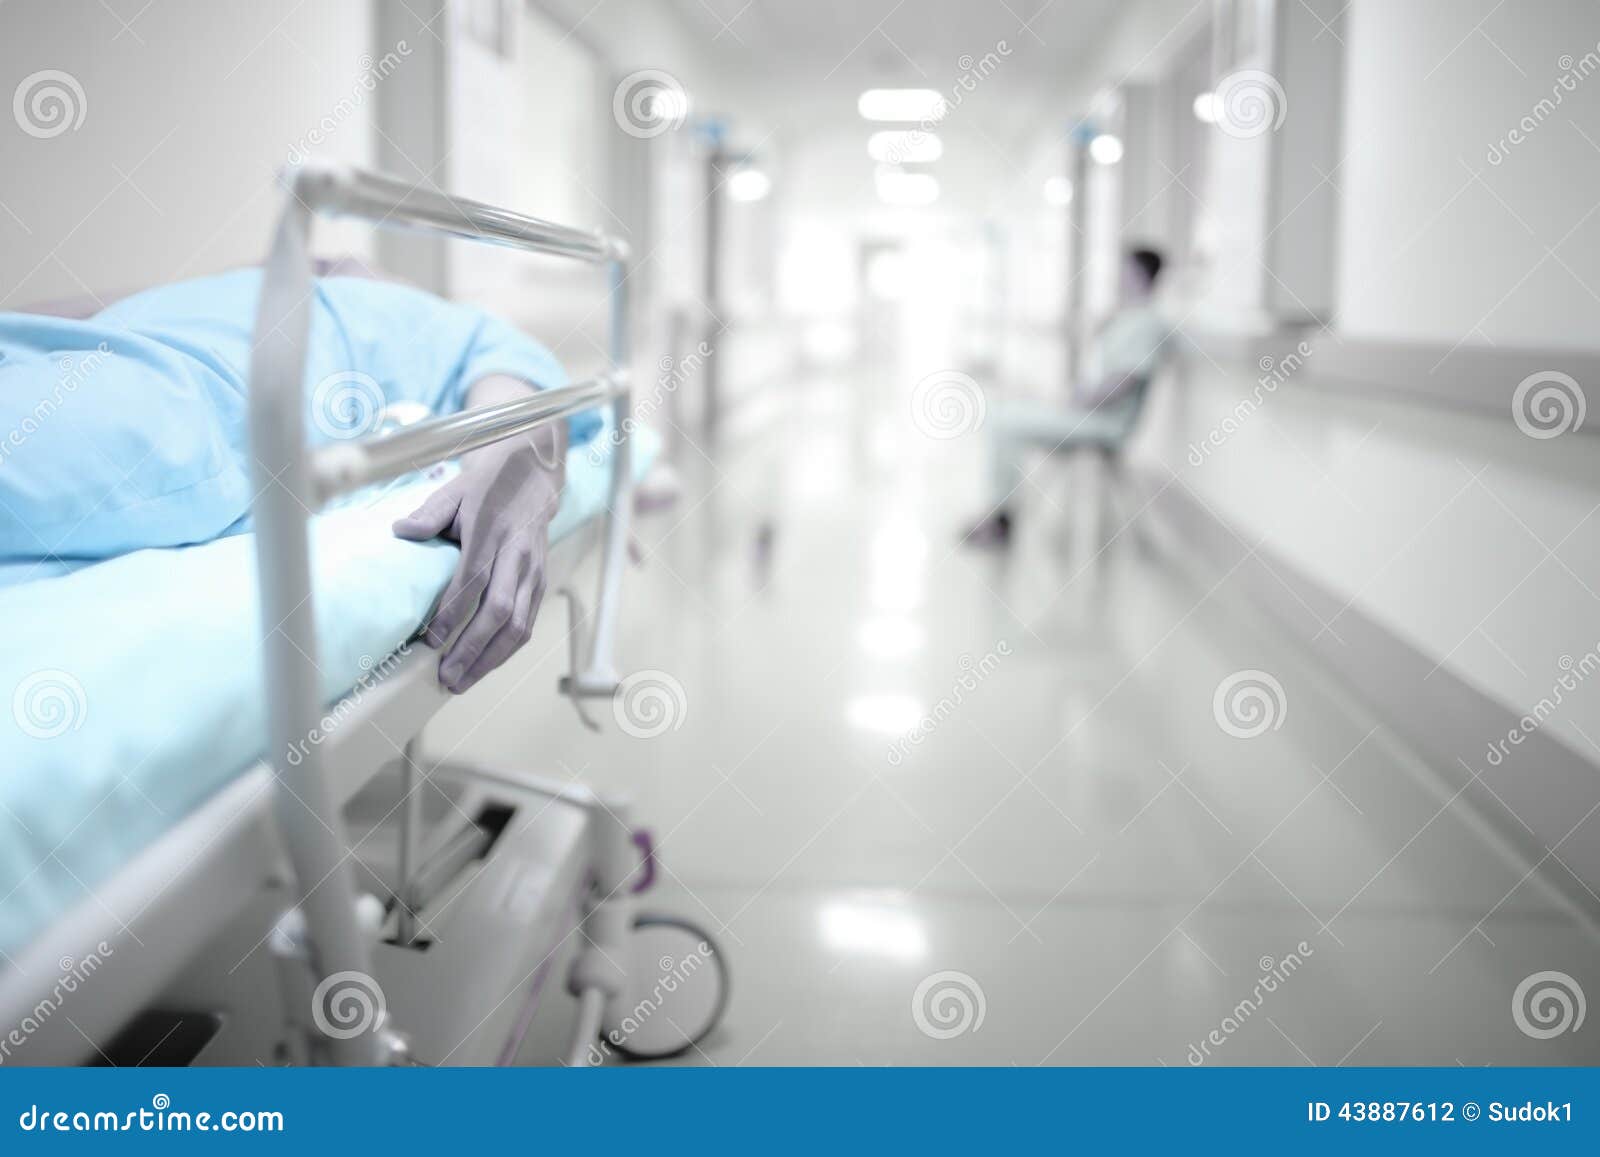 Death and Waiting in the Hospital Corridor Stock Photo - Image of ...